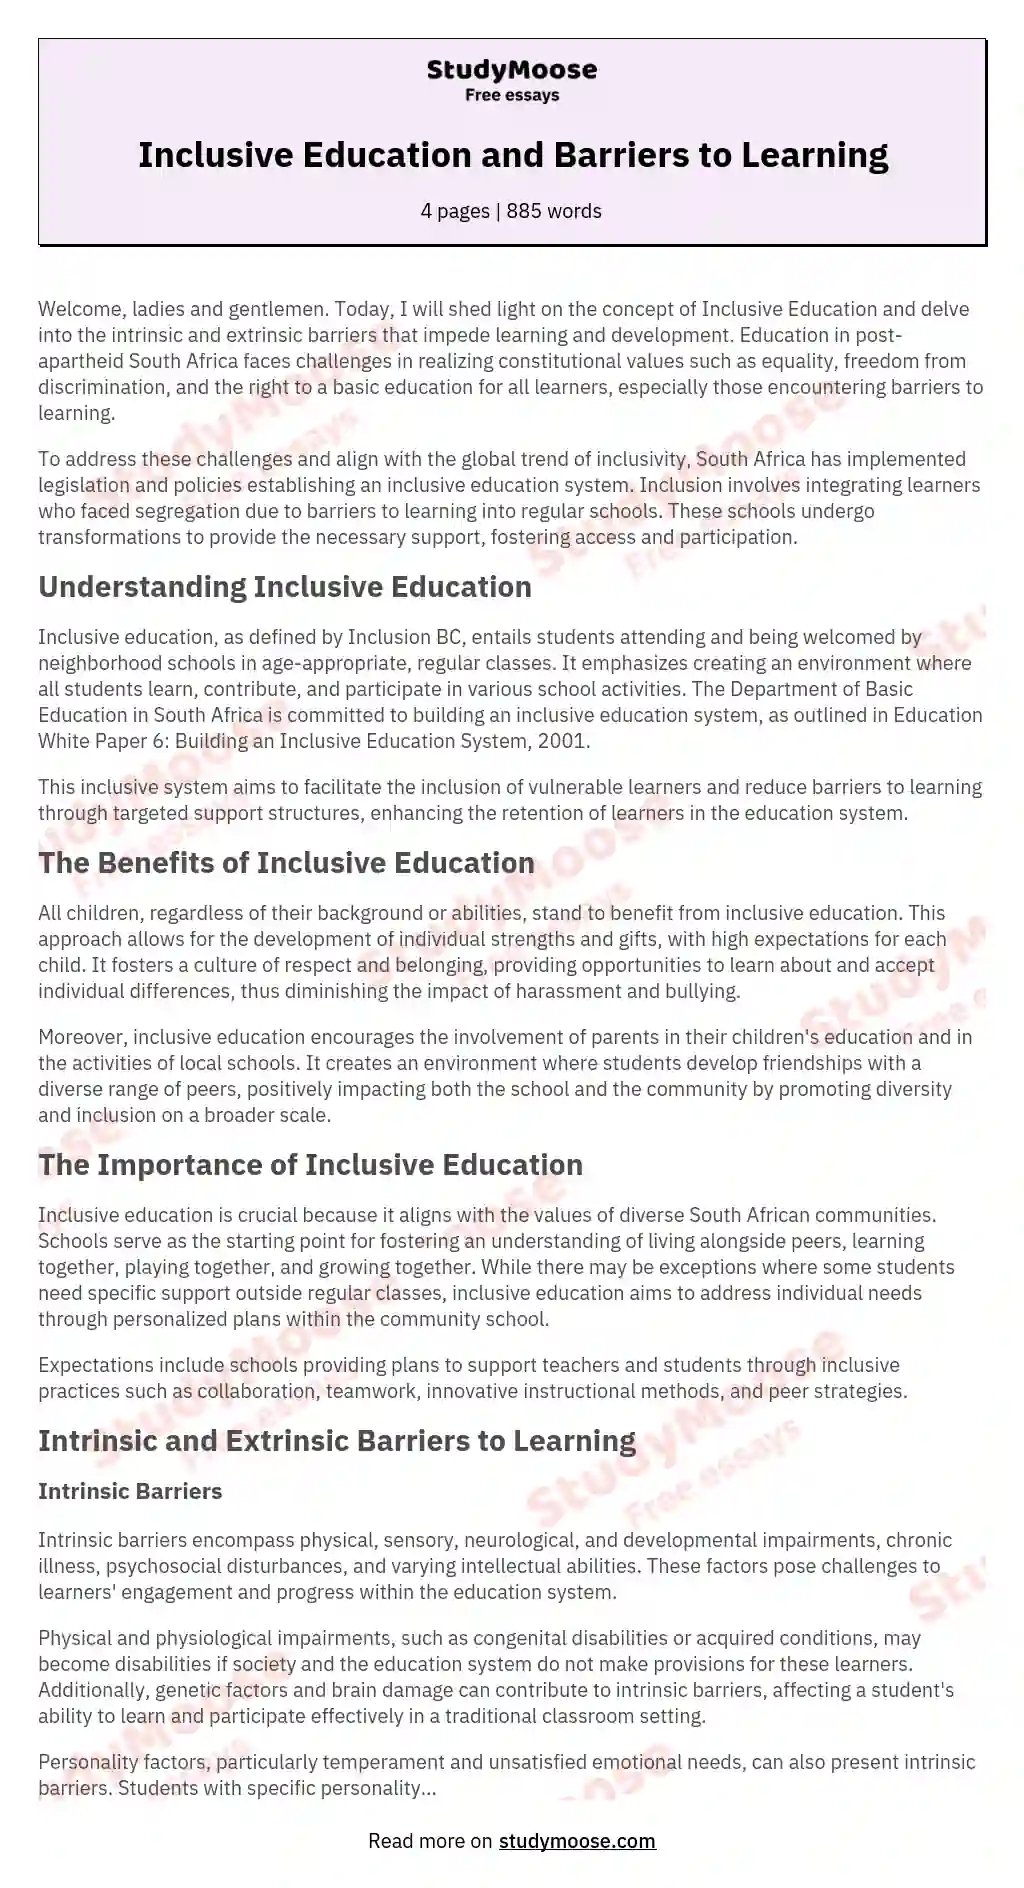 Intrinsic and Extrinsic Barriers in Education